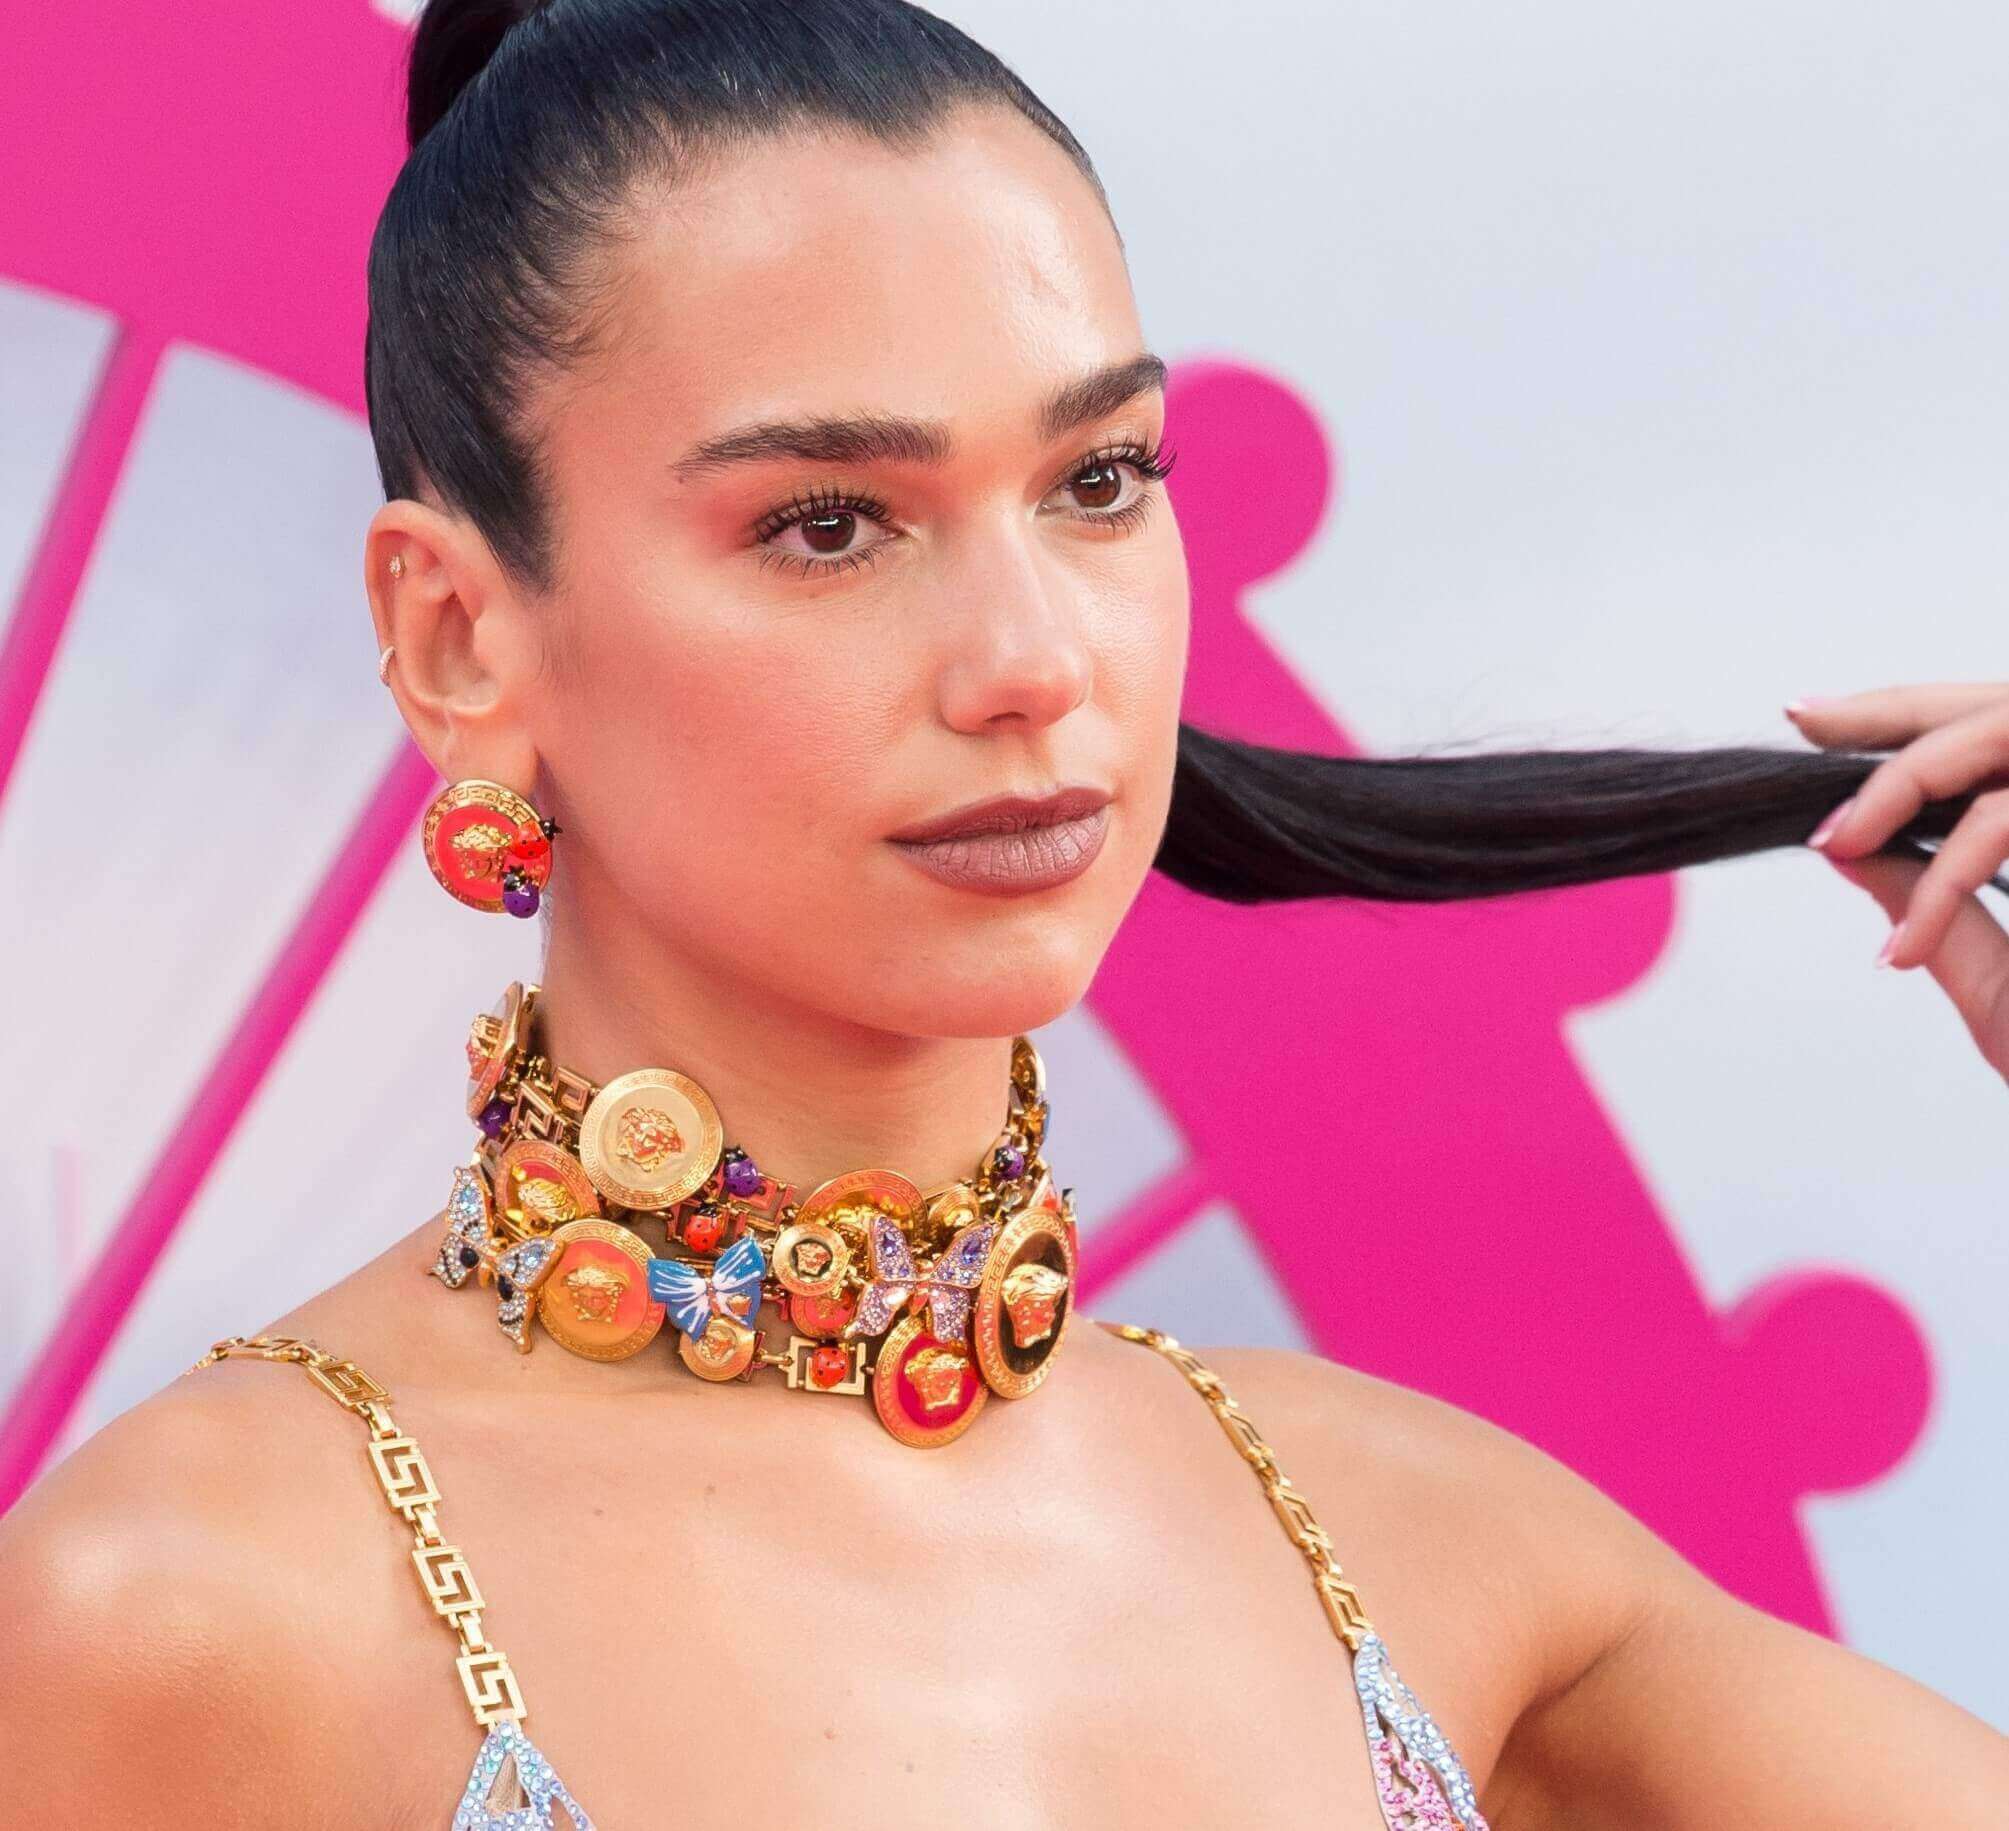 "Dance the Night" singer Dua Lipa promoting 'Barbie' while wearing a ponytail